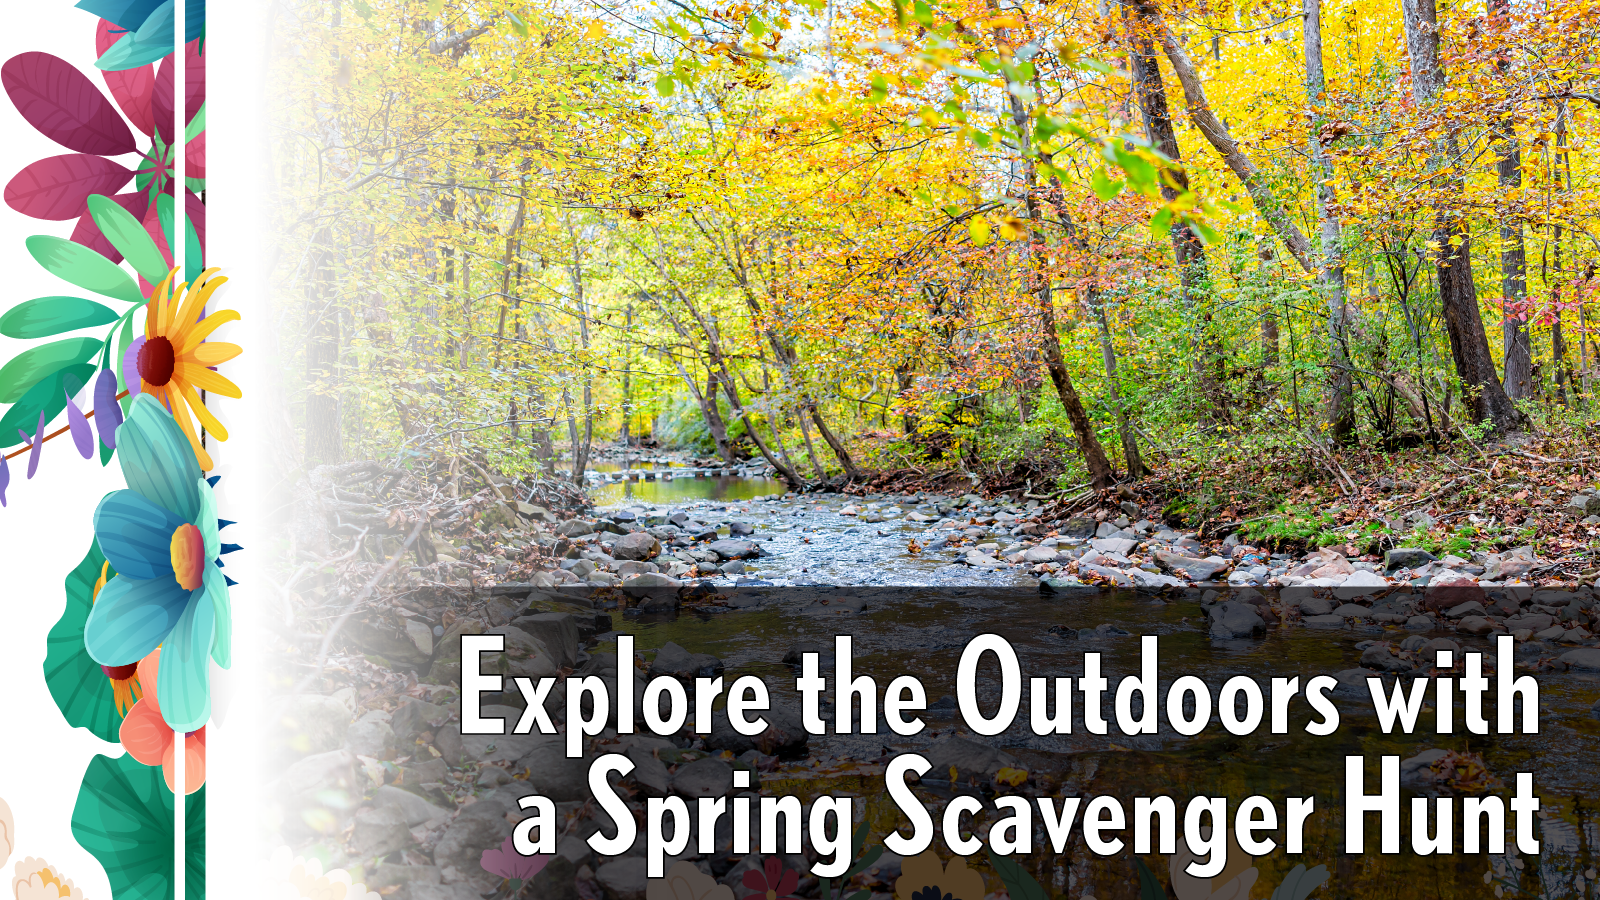 Explore the Outdoors with a Spring Scavenger Hunt